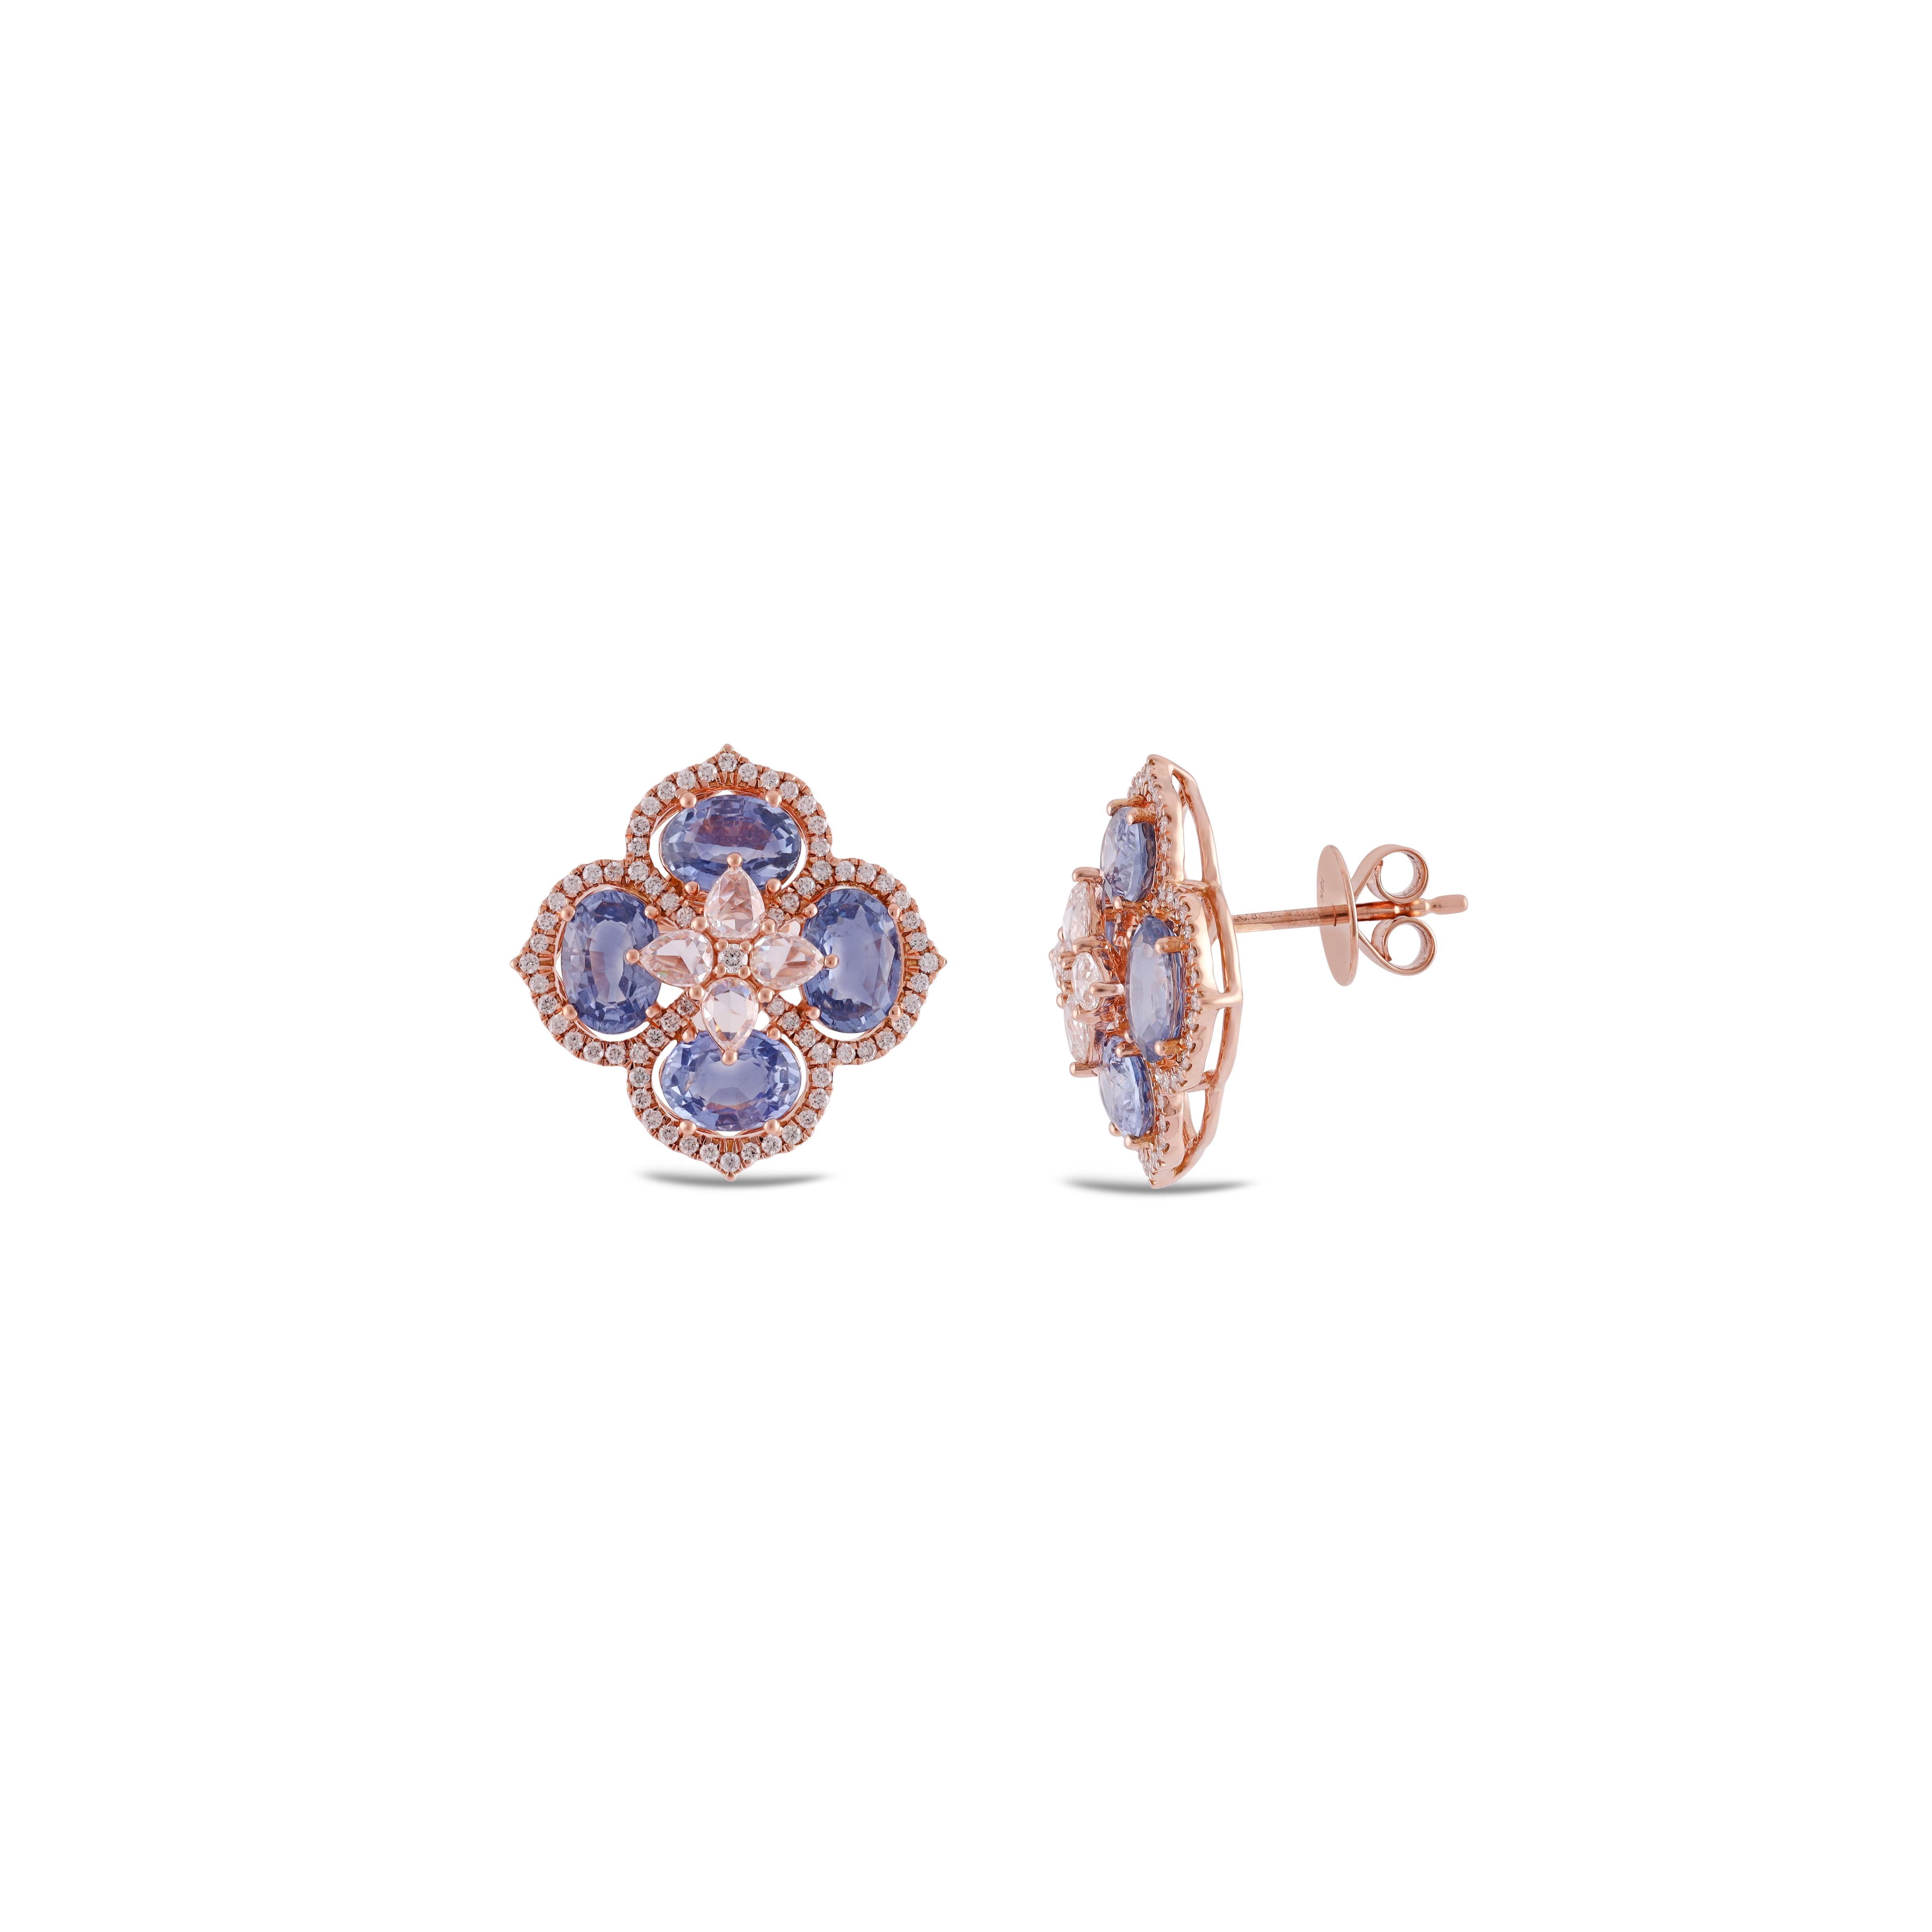 Contemporary 6.66 Carat Blue Sapphire & Diamond Flower Earrings Studs in 18k Rose Gold . For Sale